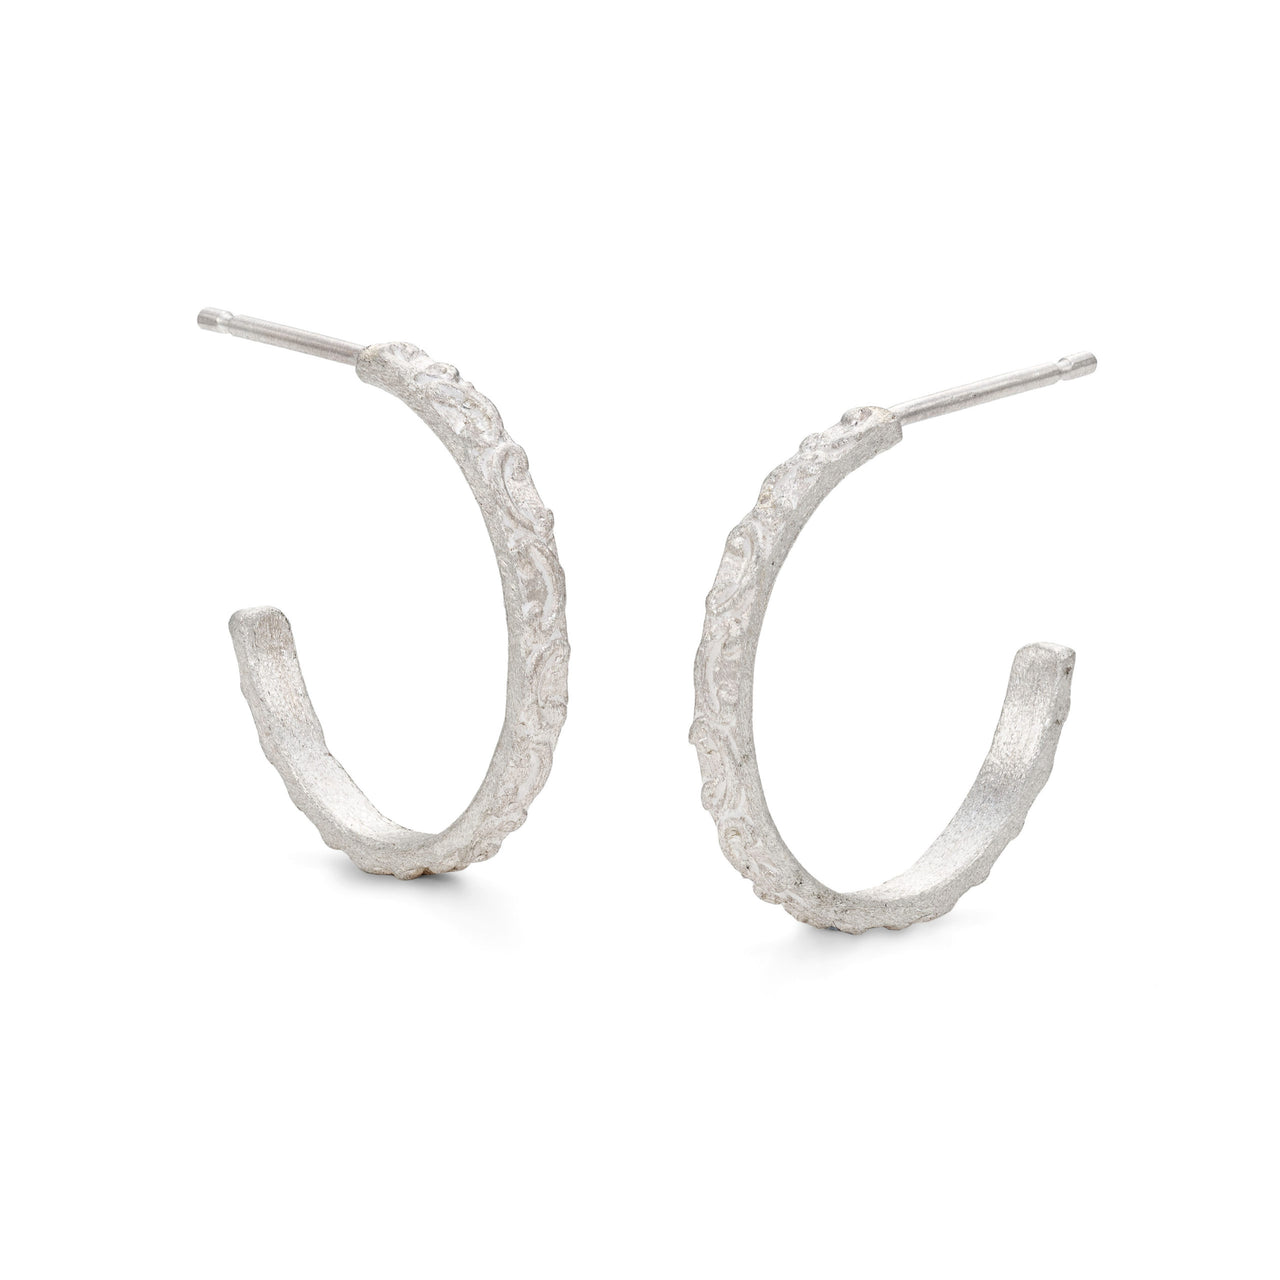 Silver Patterned Hoops